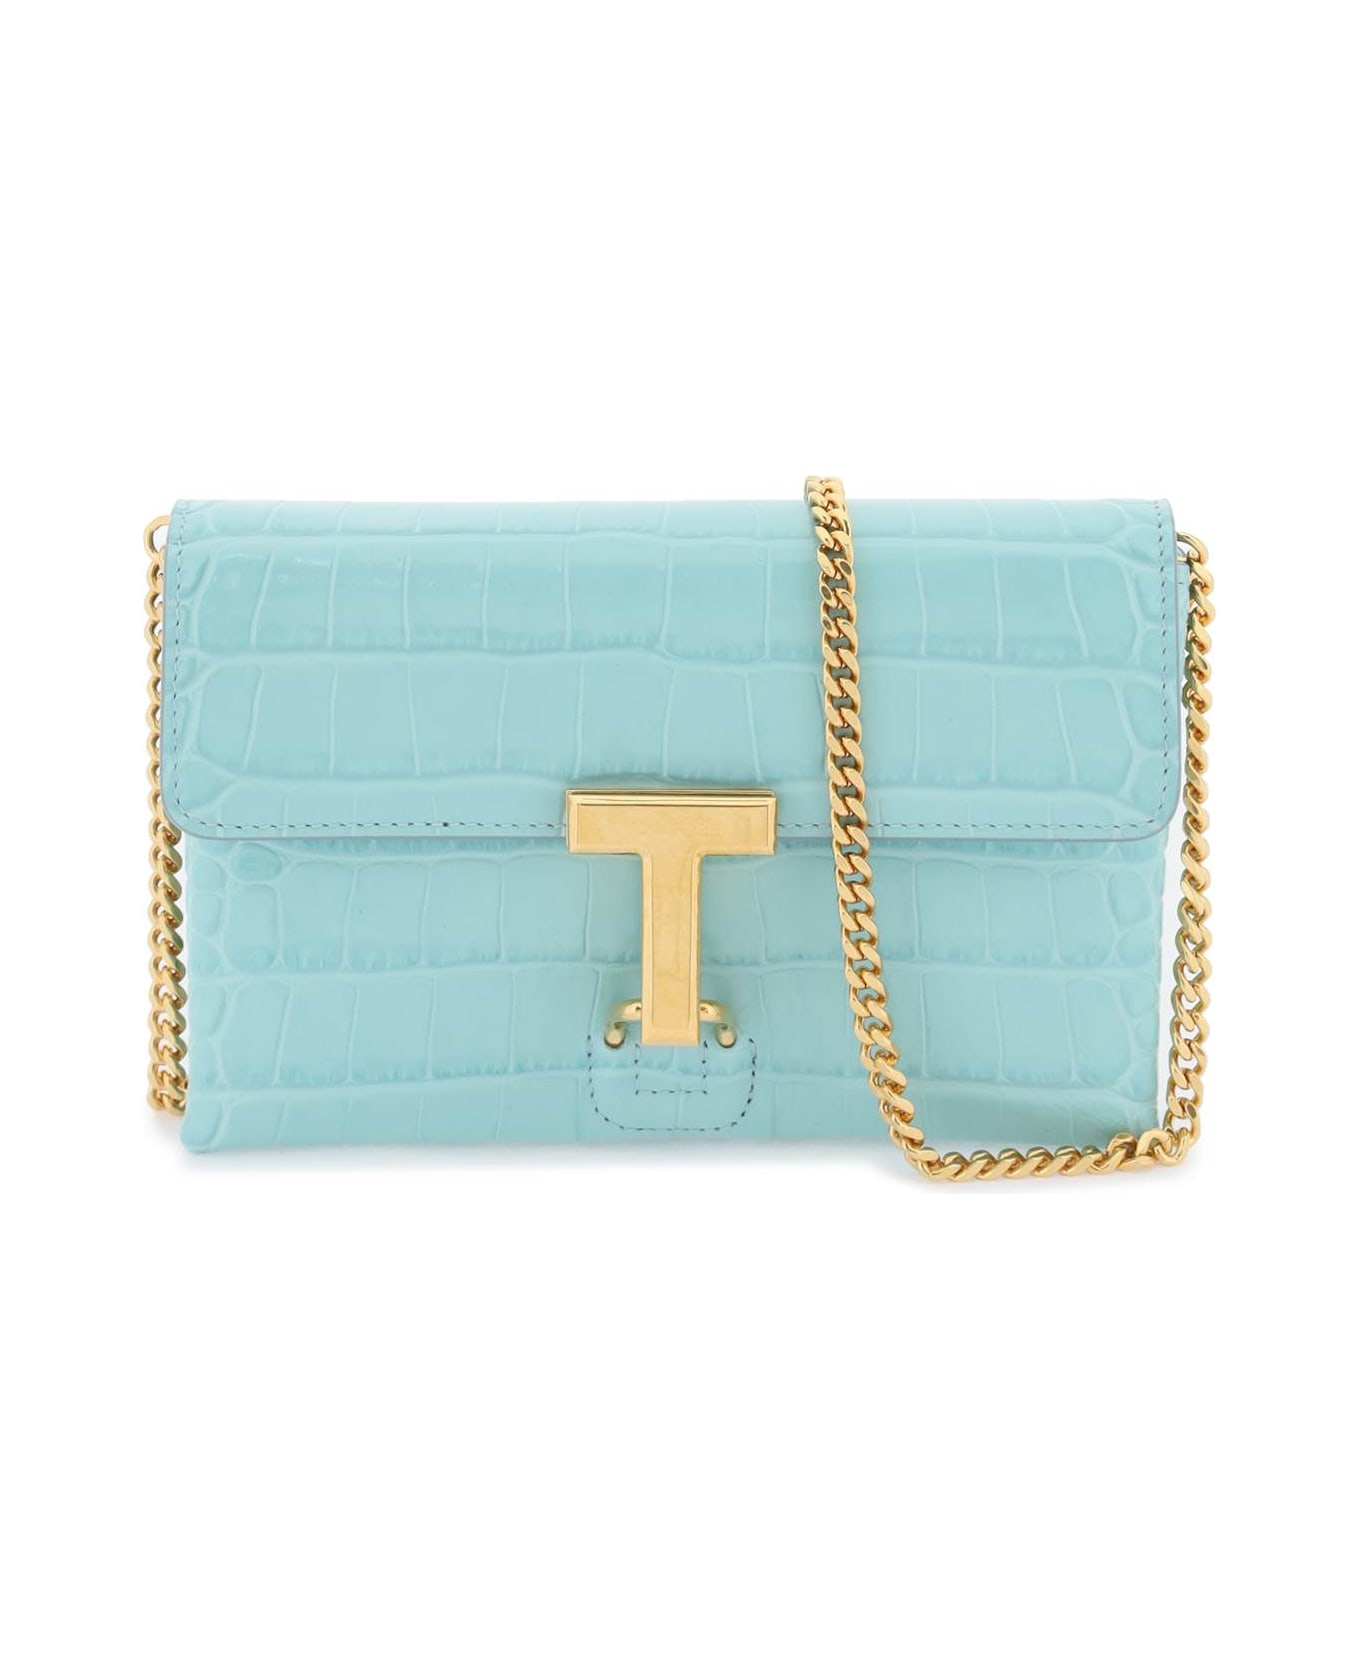 Tom Ford Croco-embossed Leather Mini Bag - PASTEL TURQUOISE (Light blue)